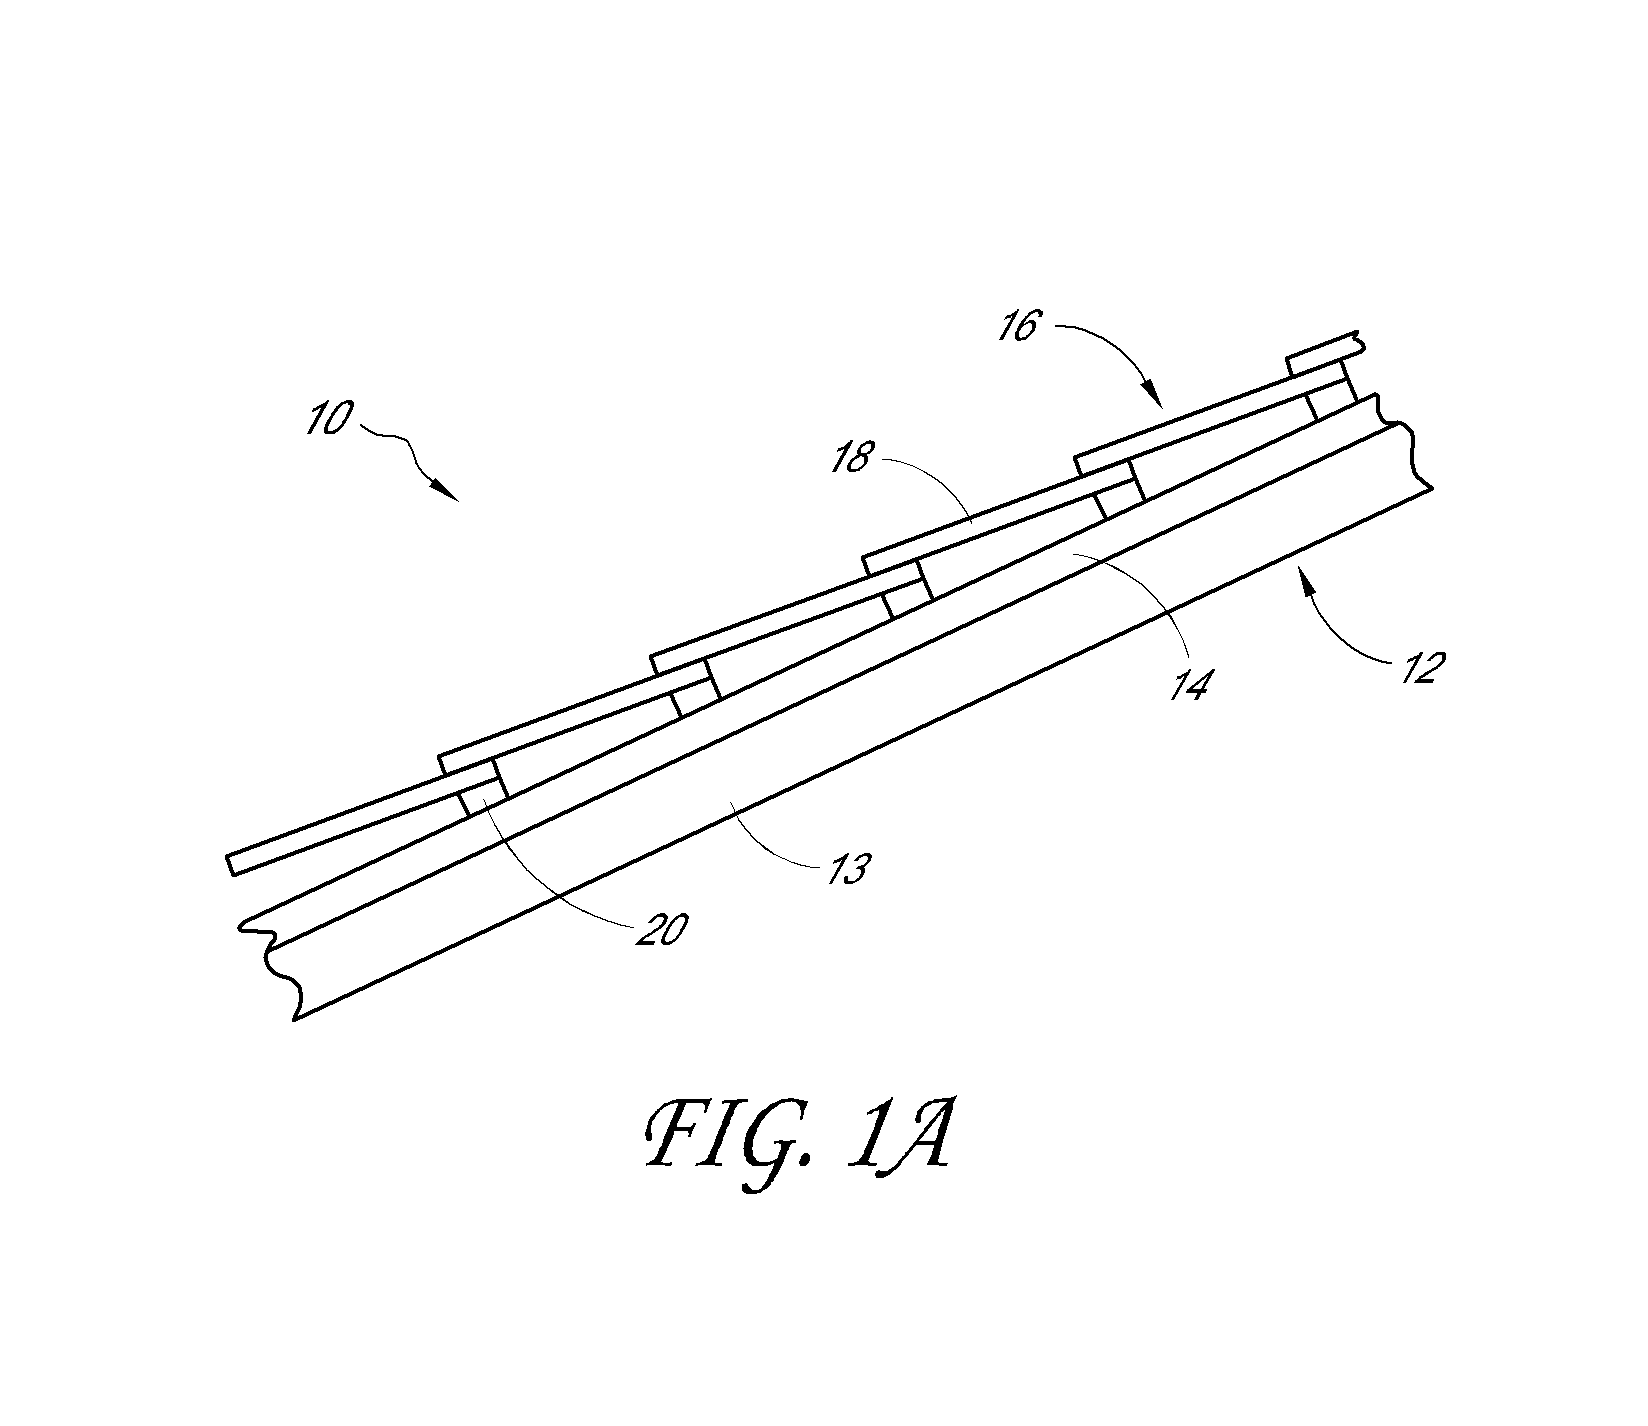 Roof vent for supporting a solar panel